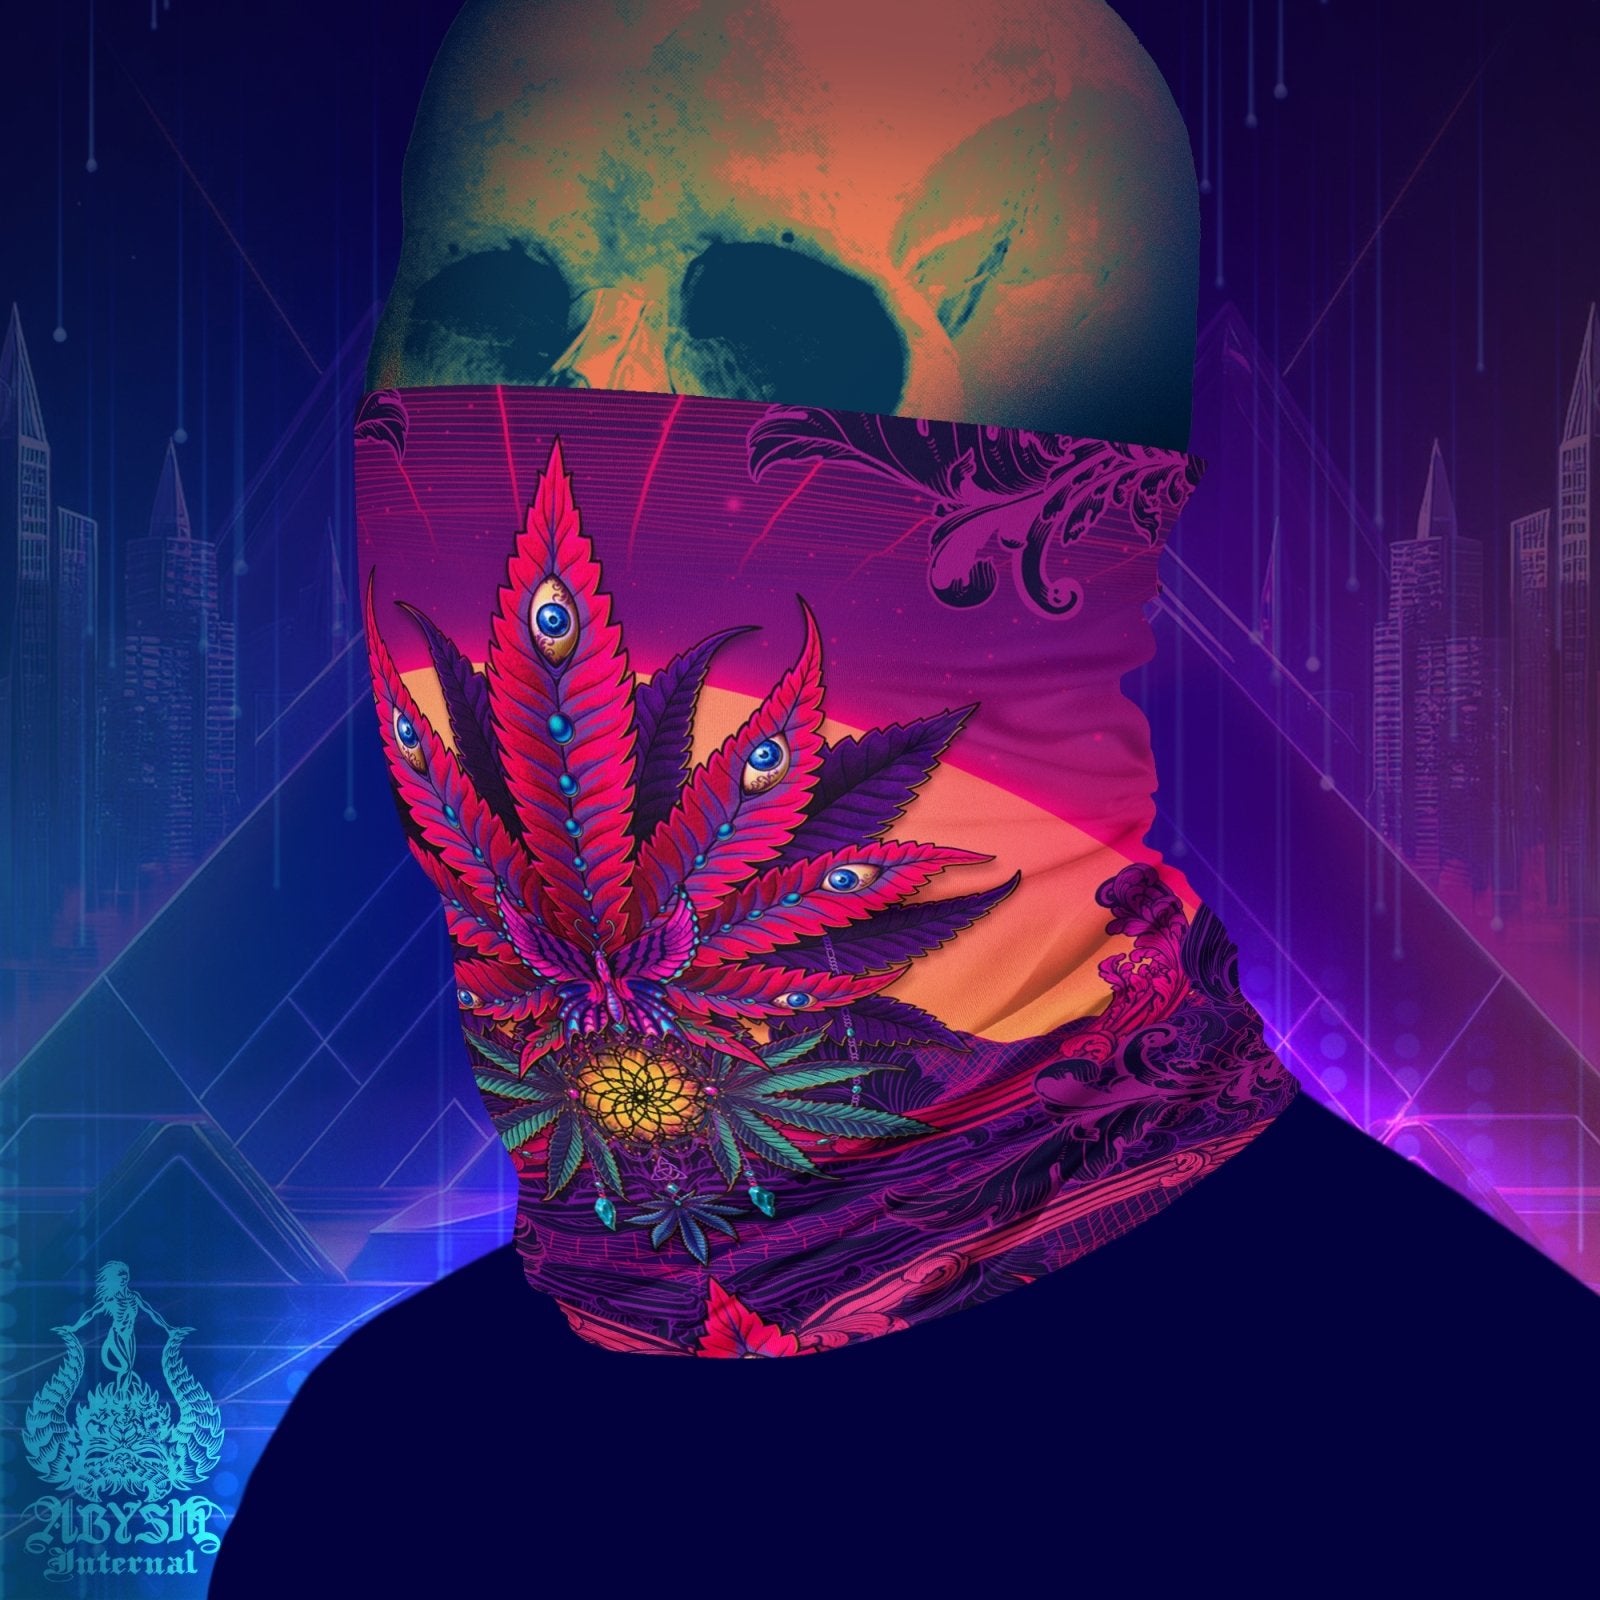 Cannabis Neck Gaiter, Weed Face Mask, Synthwave Head Covering, Psychedelic Vaporwave 80s Retrowave, Festival Outfit, 420 Gift - Marijuana - Abysm Internal